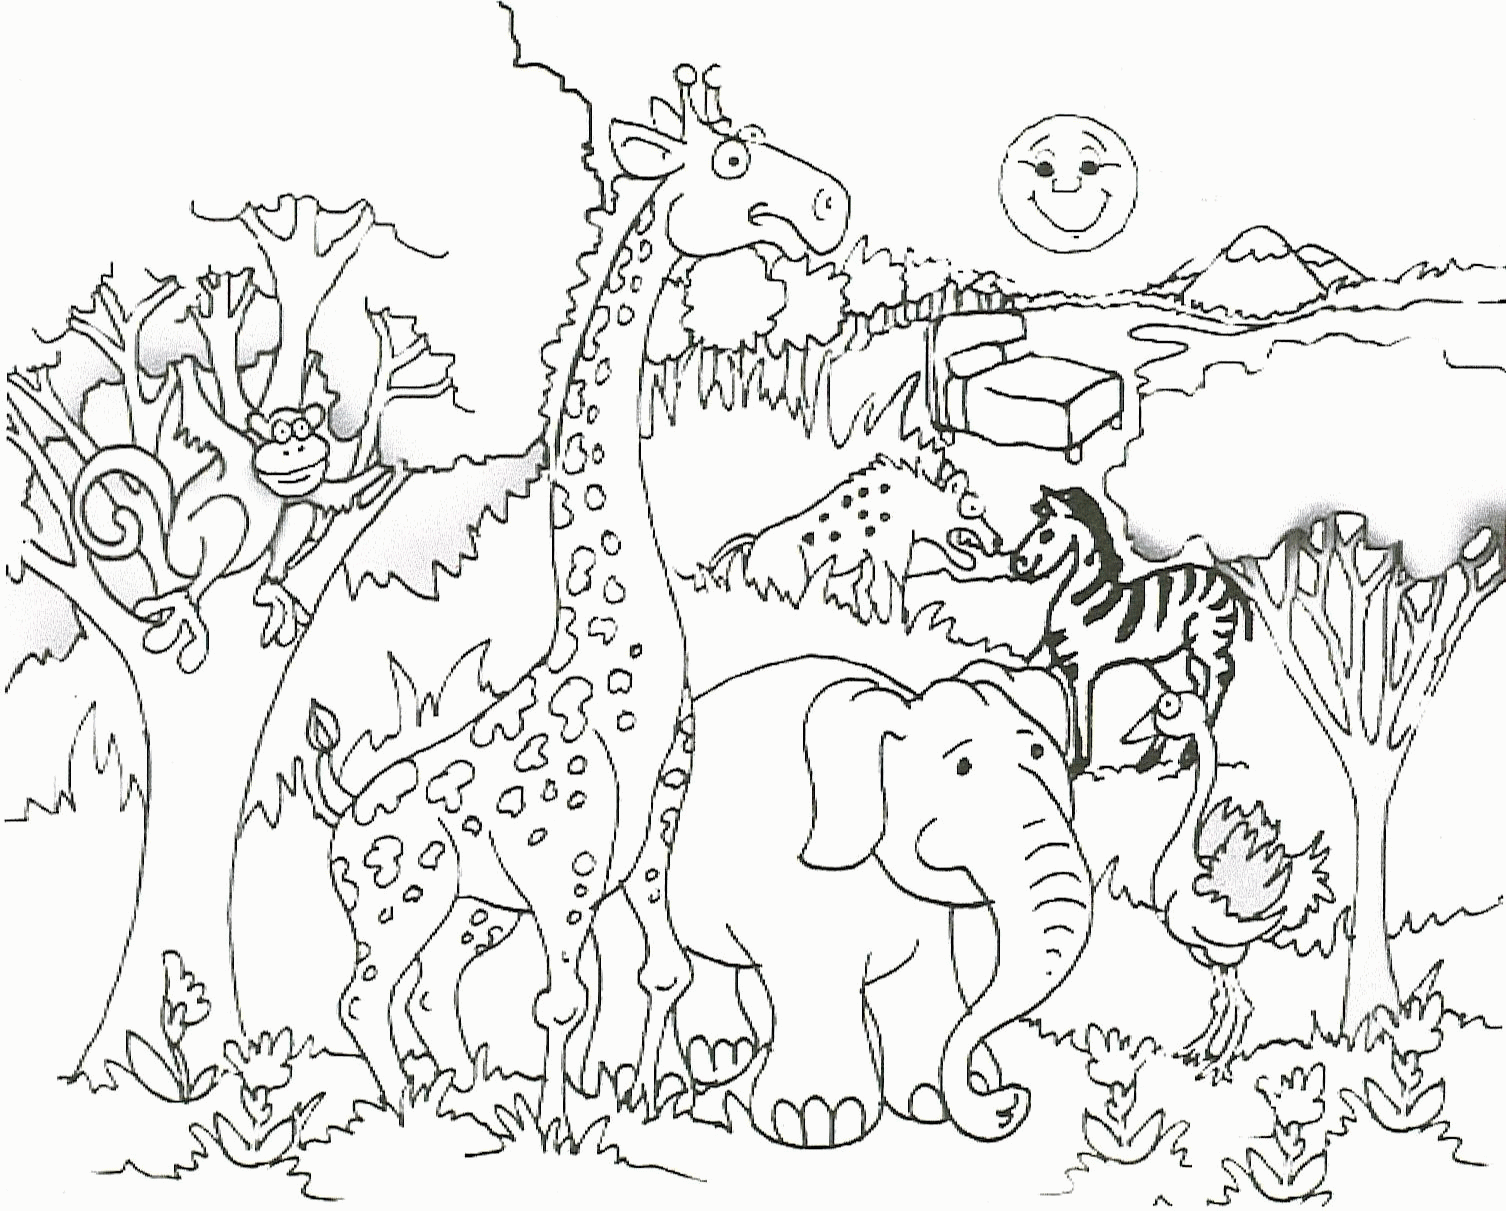 Zoo Scene Coloring Pages - Coloring Page Photos